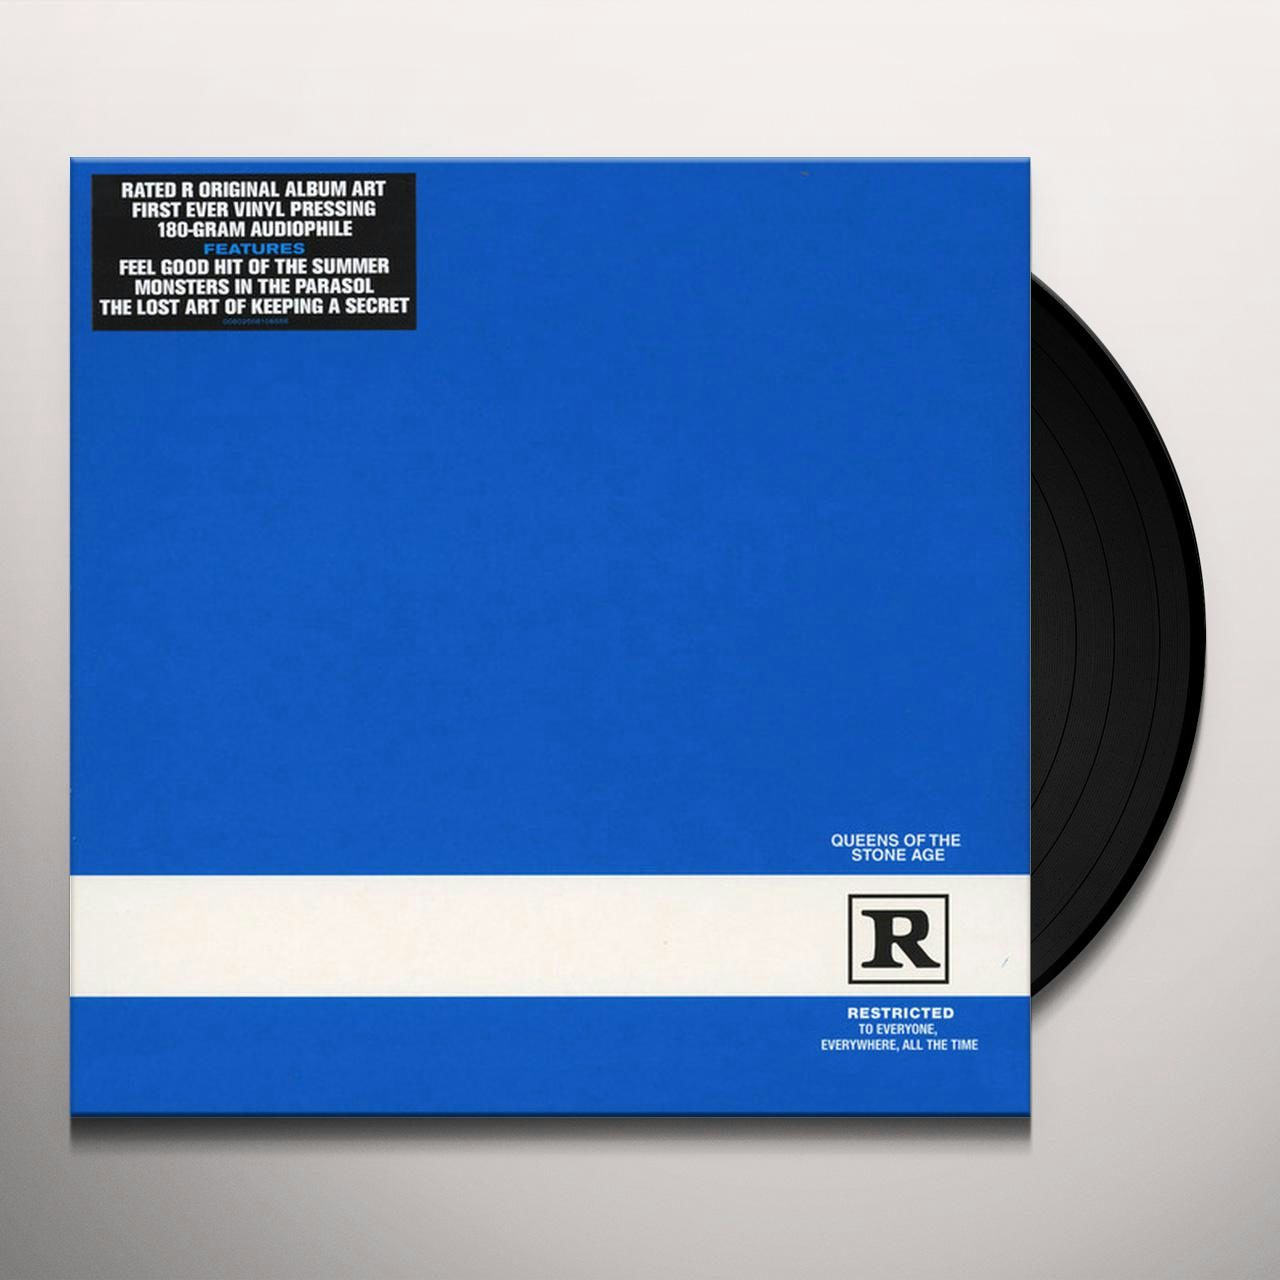 Rated R Vinyl Record - Queens of the Stone Age